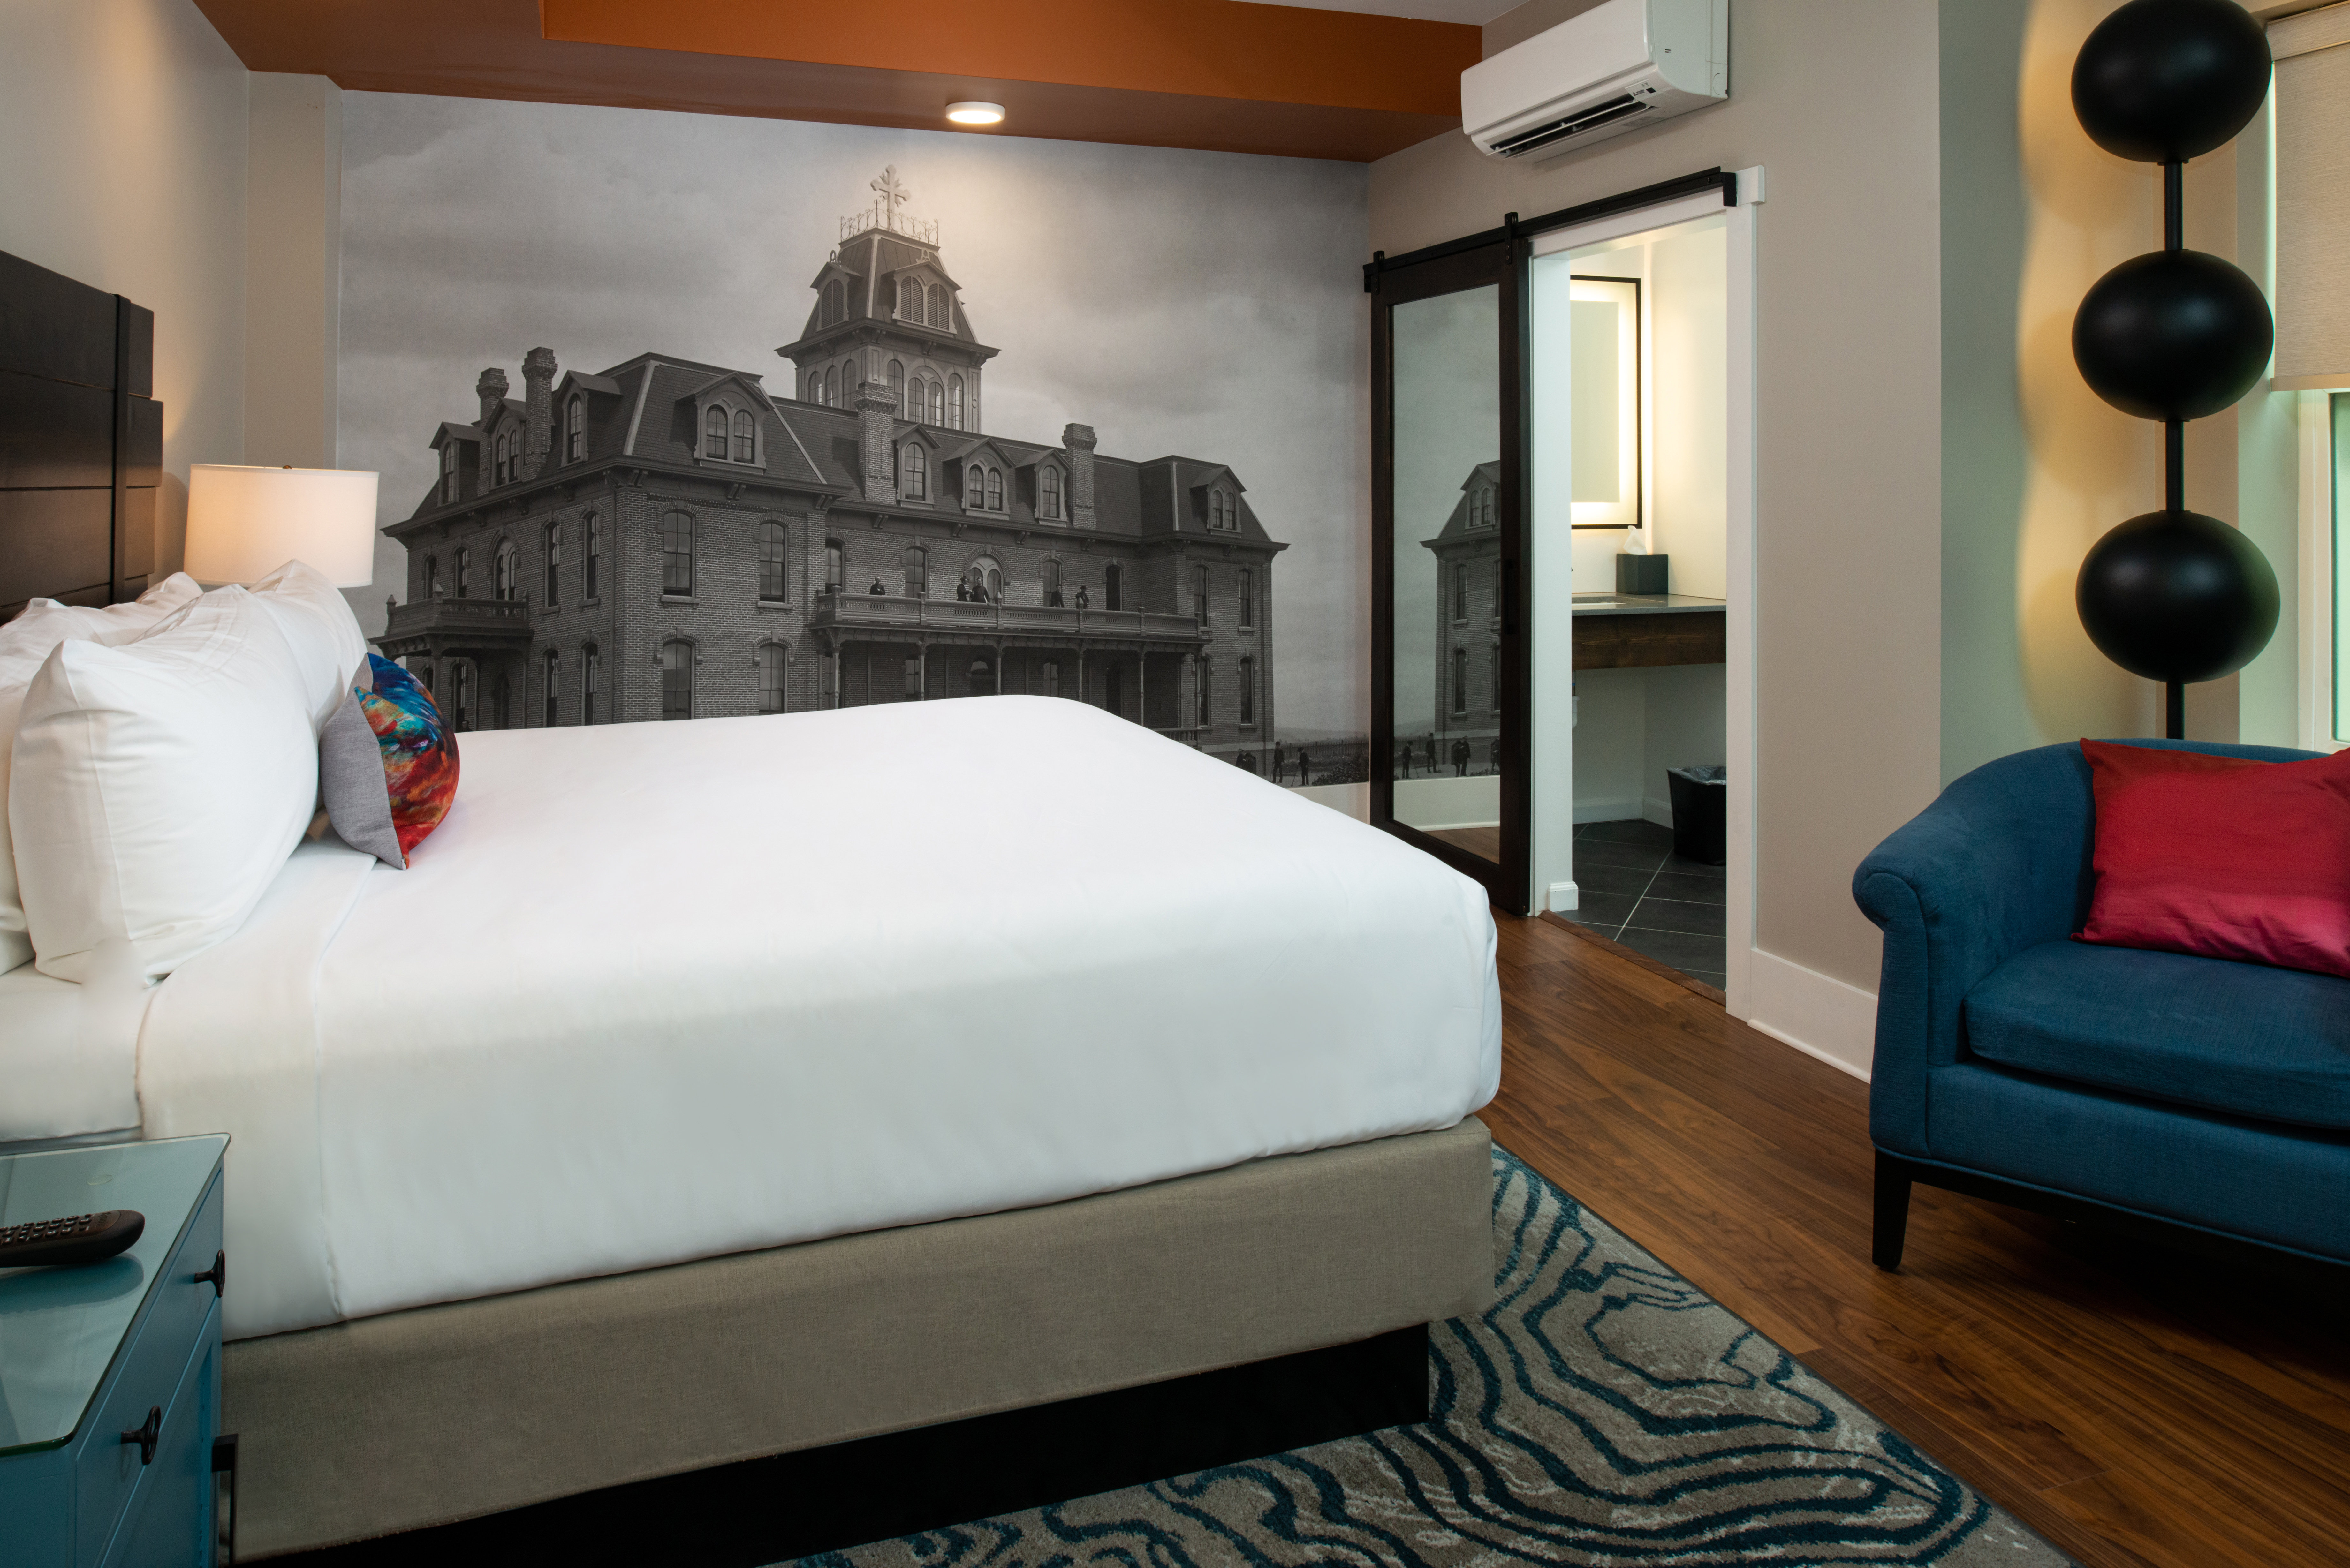 Hotel Indigo Spokane. Family suite room with single king bed.